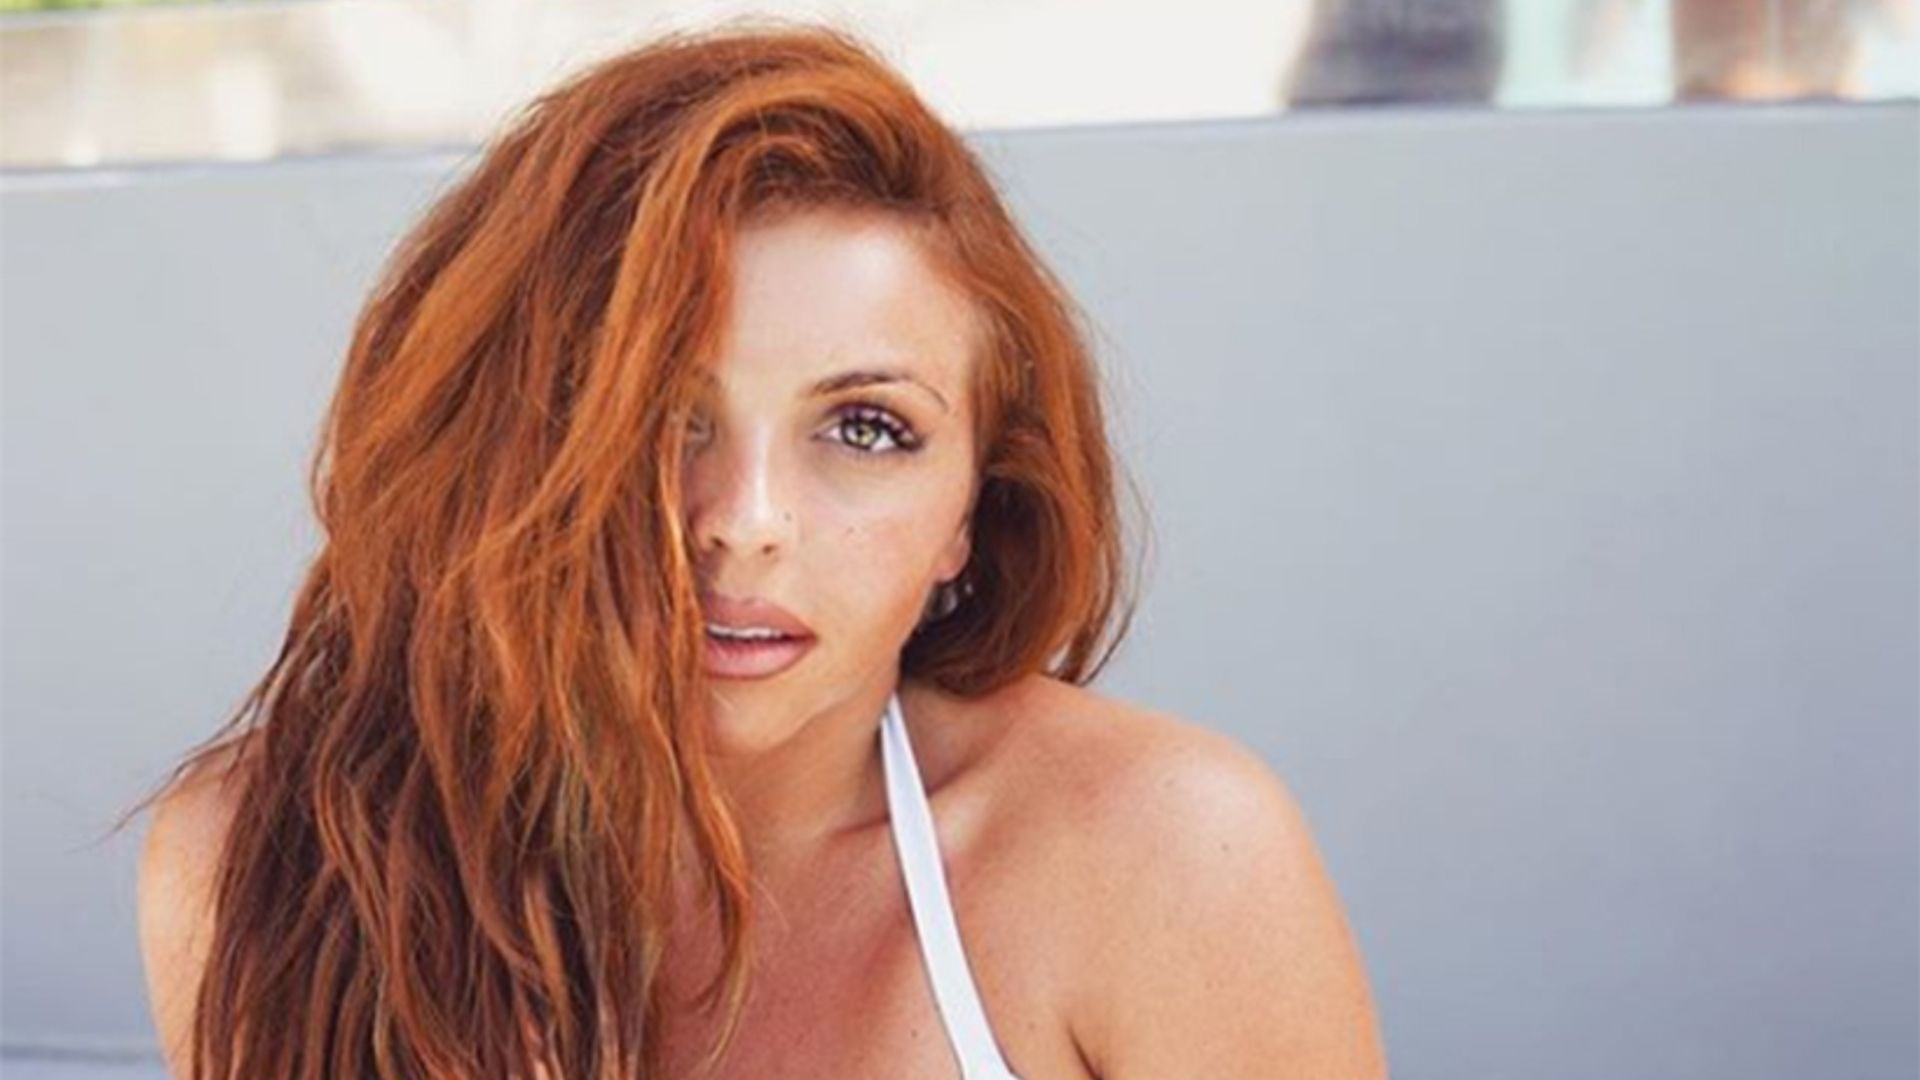 Jesy Nelson shows off incredible figure in sizzling bikini snaps